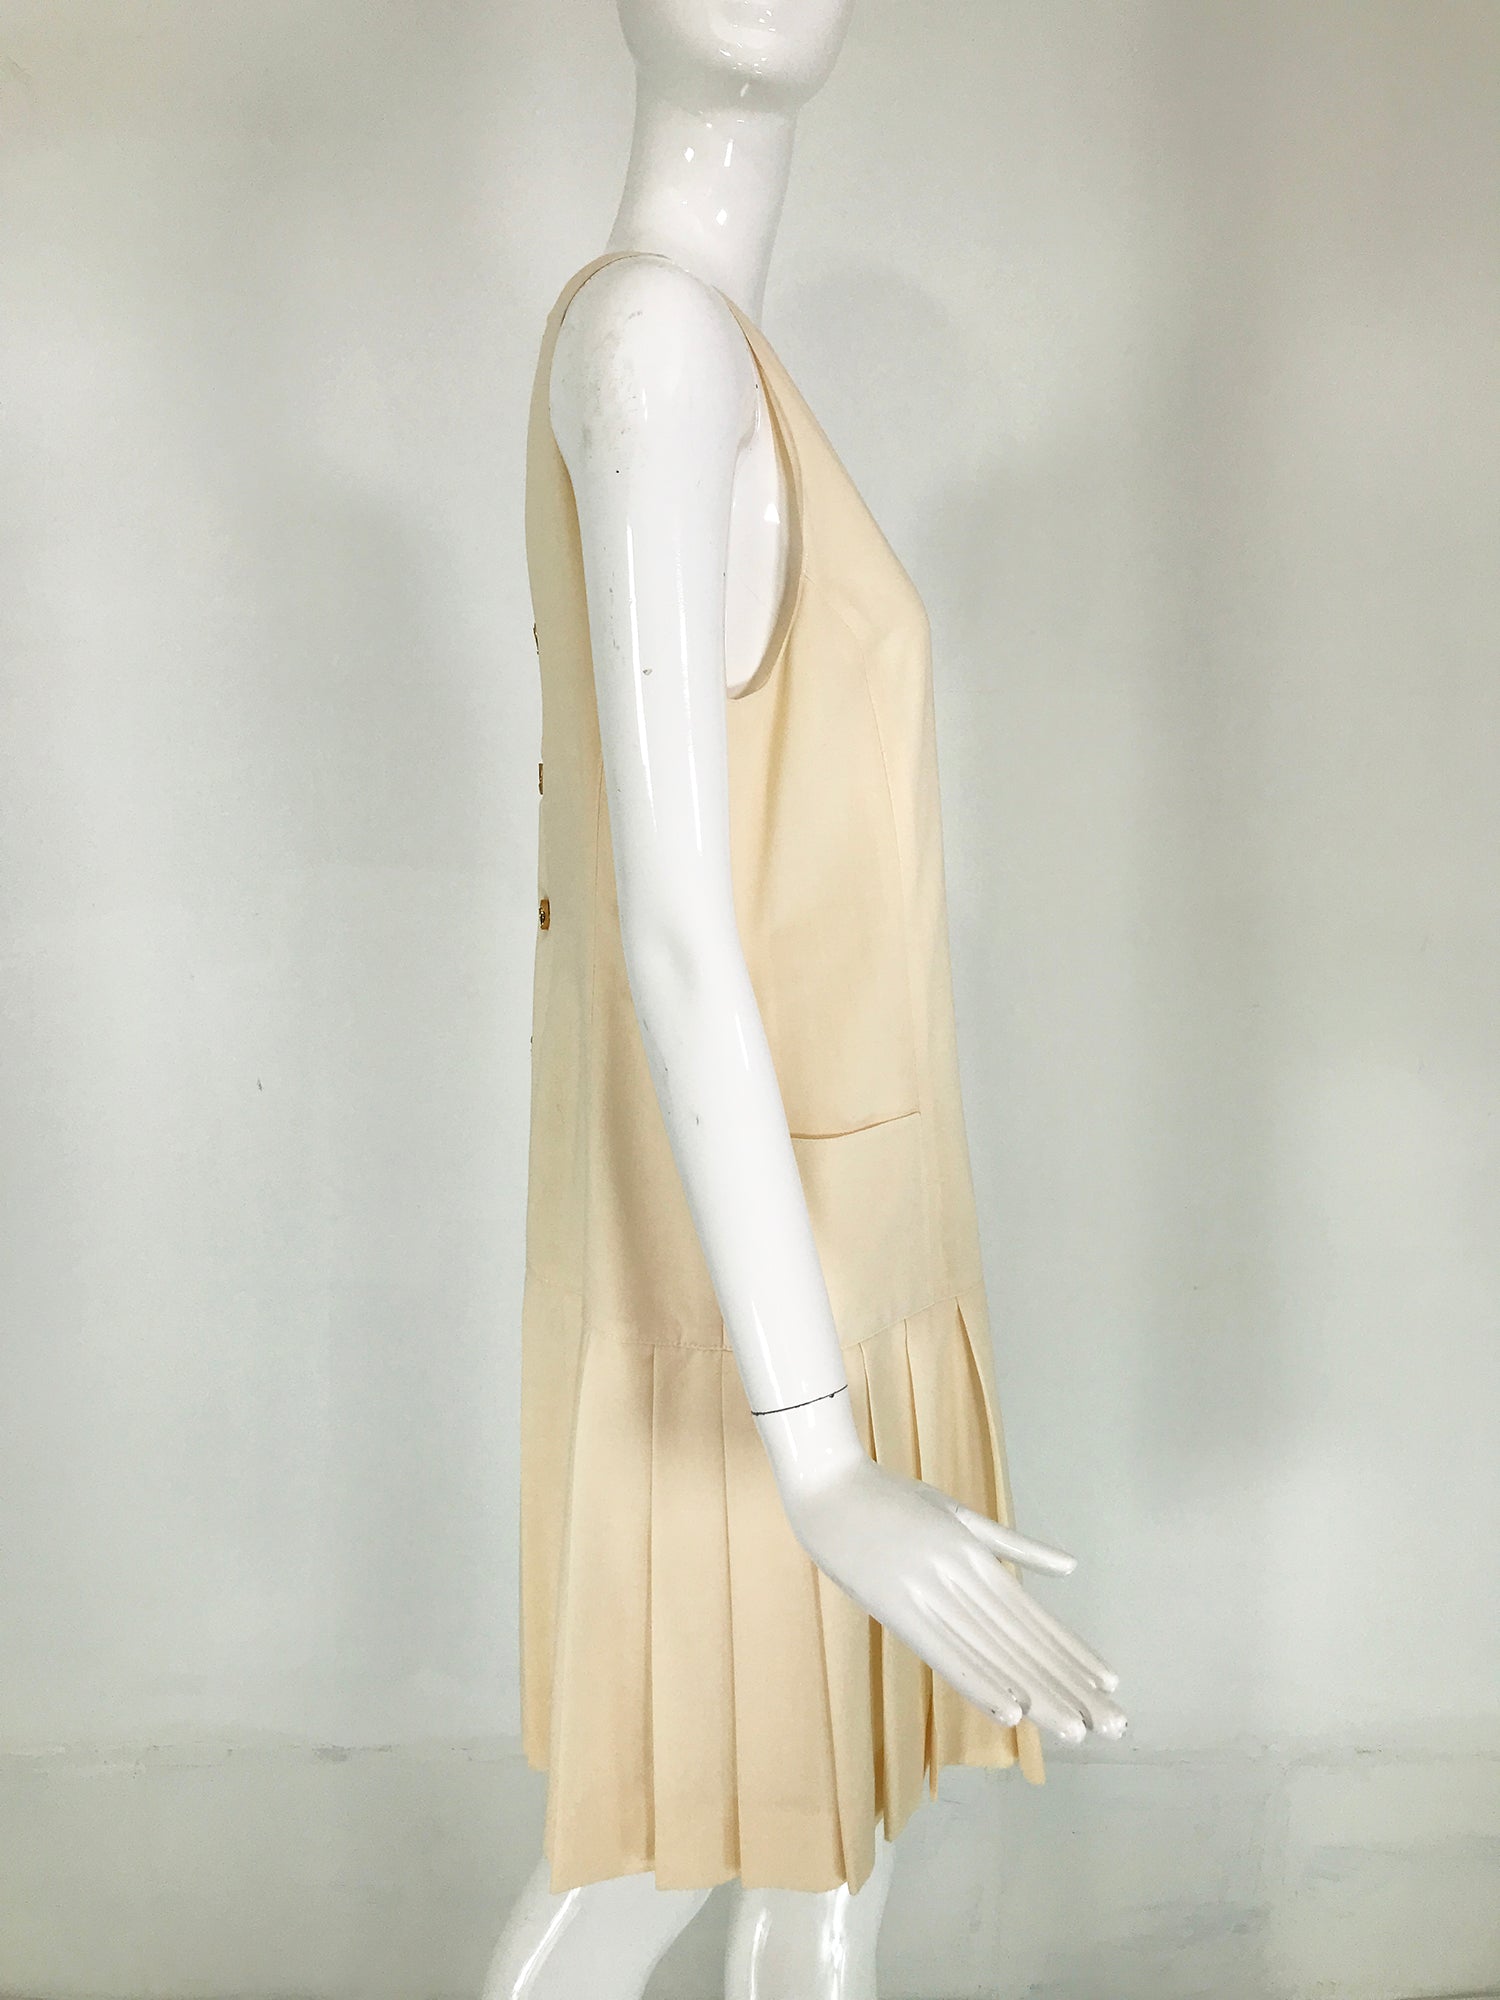 Chanel pleated dresses 1920s